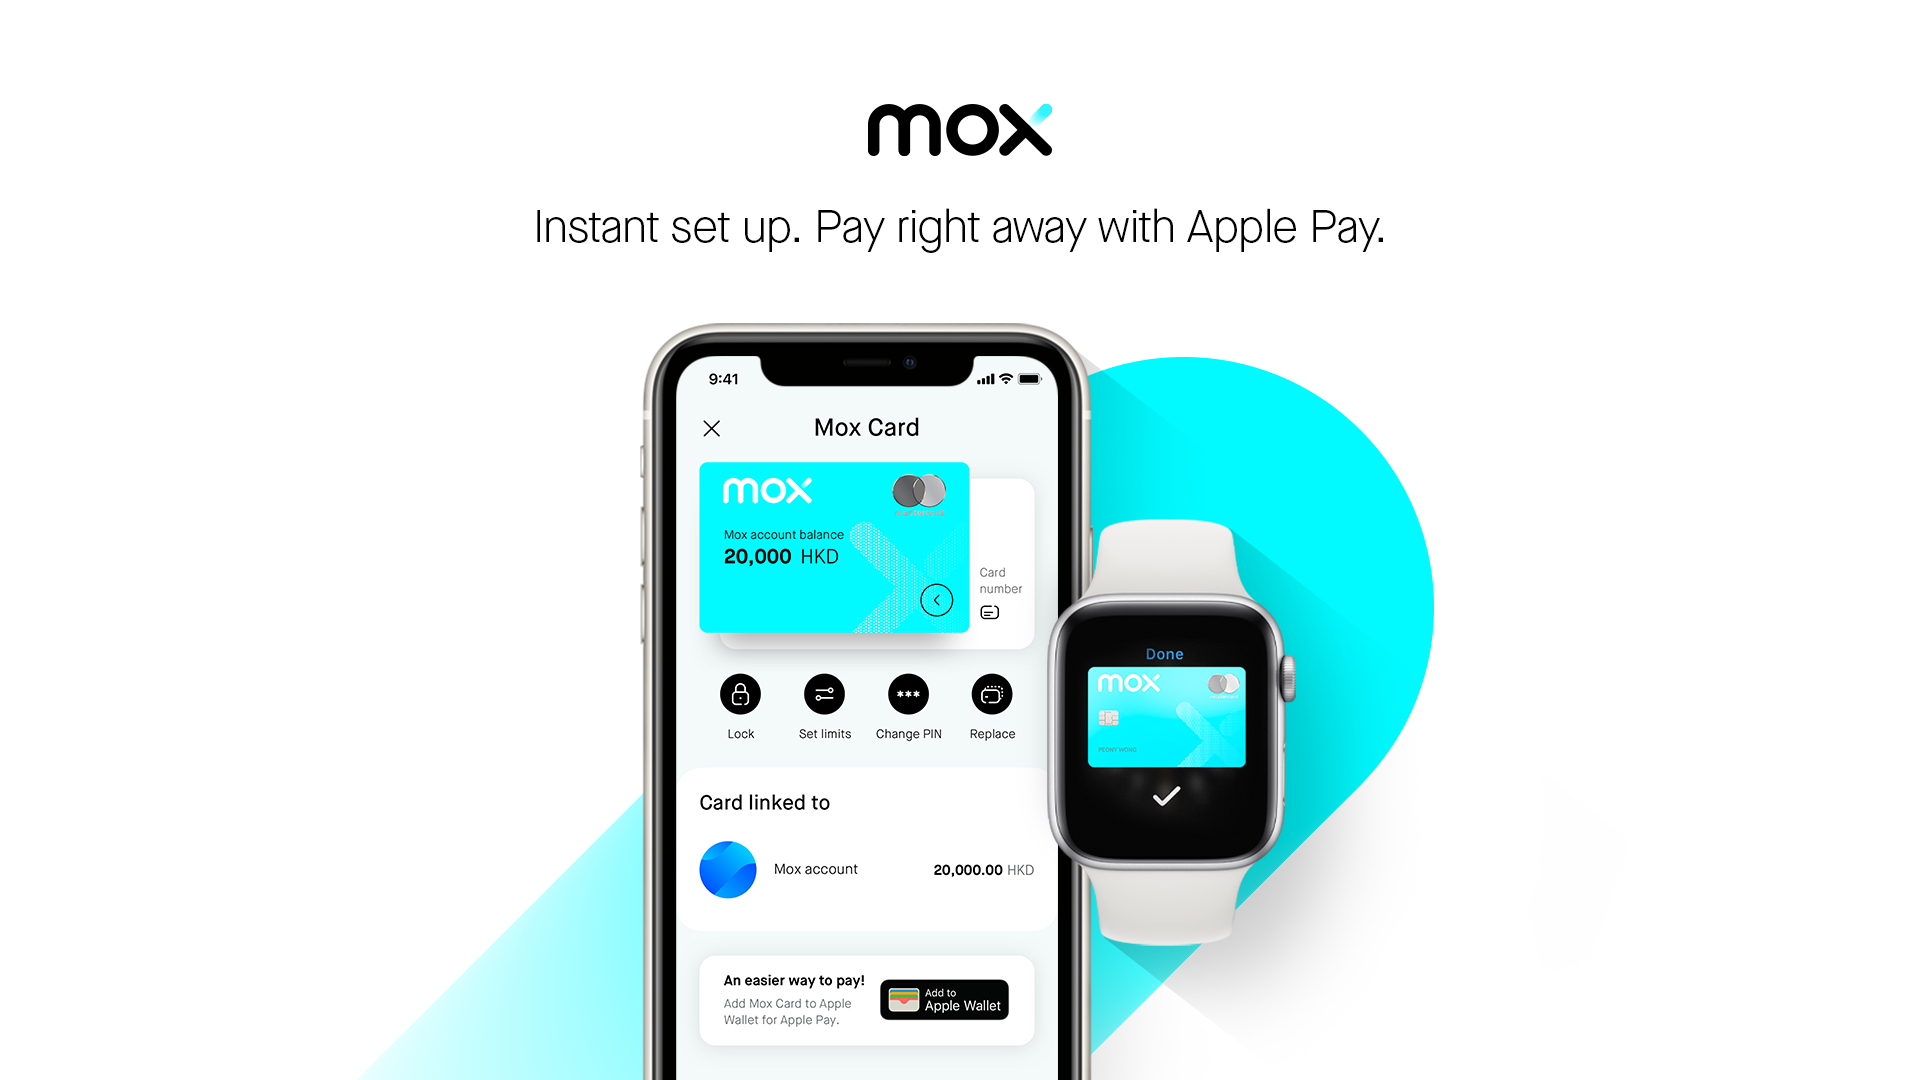 Mox brings Apple Pay to Customers 